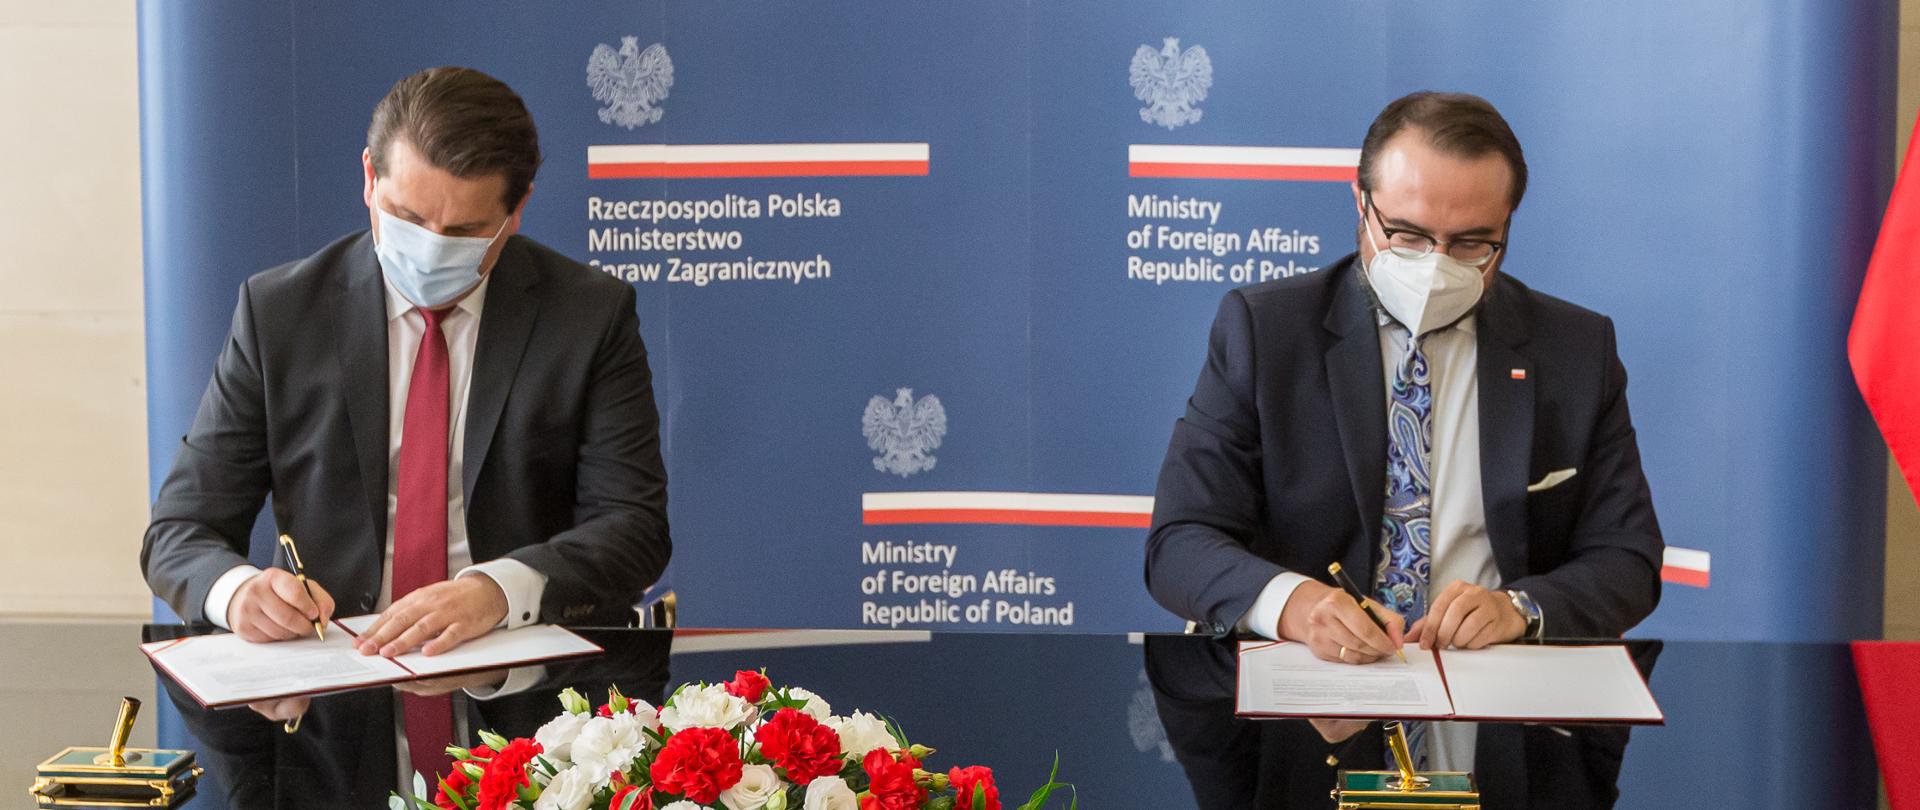 Ministry of Foreign Affairs and Statistics Poland enter into new cooperation arrangements